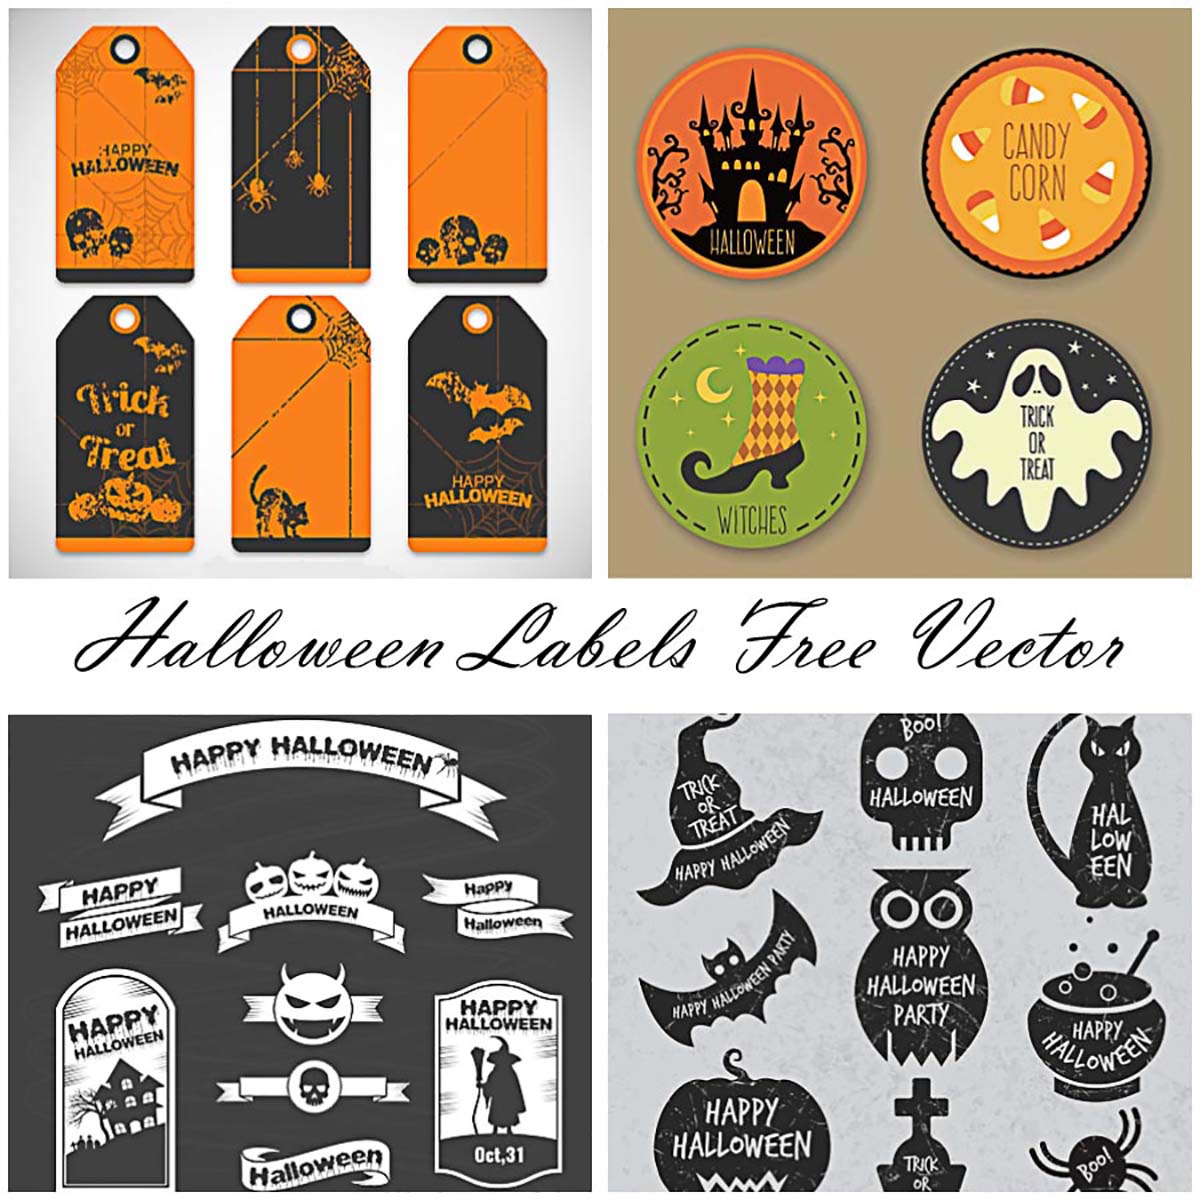 Halloween cards and labels sketchy vector